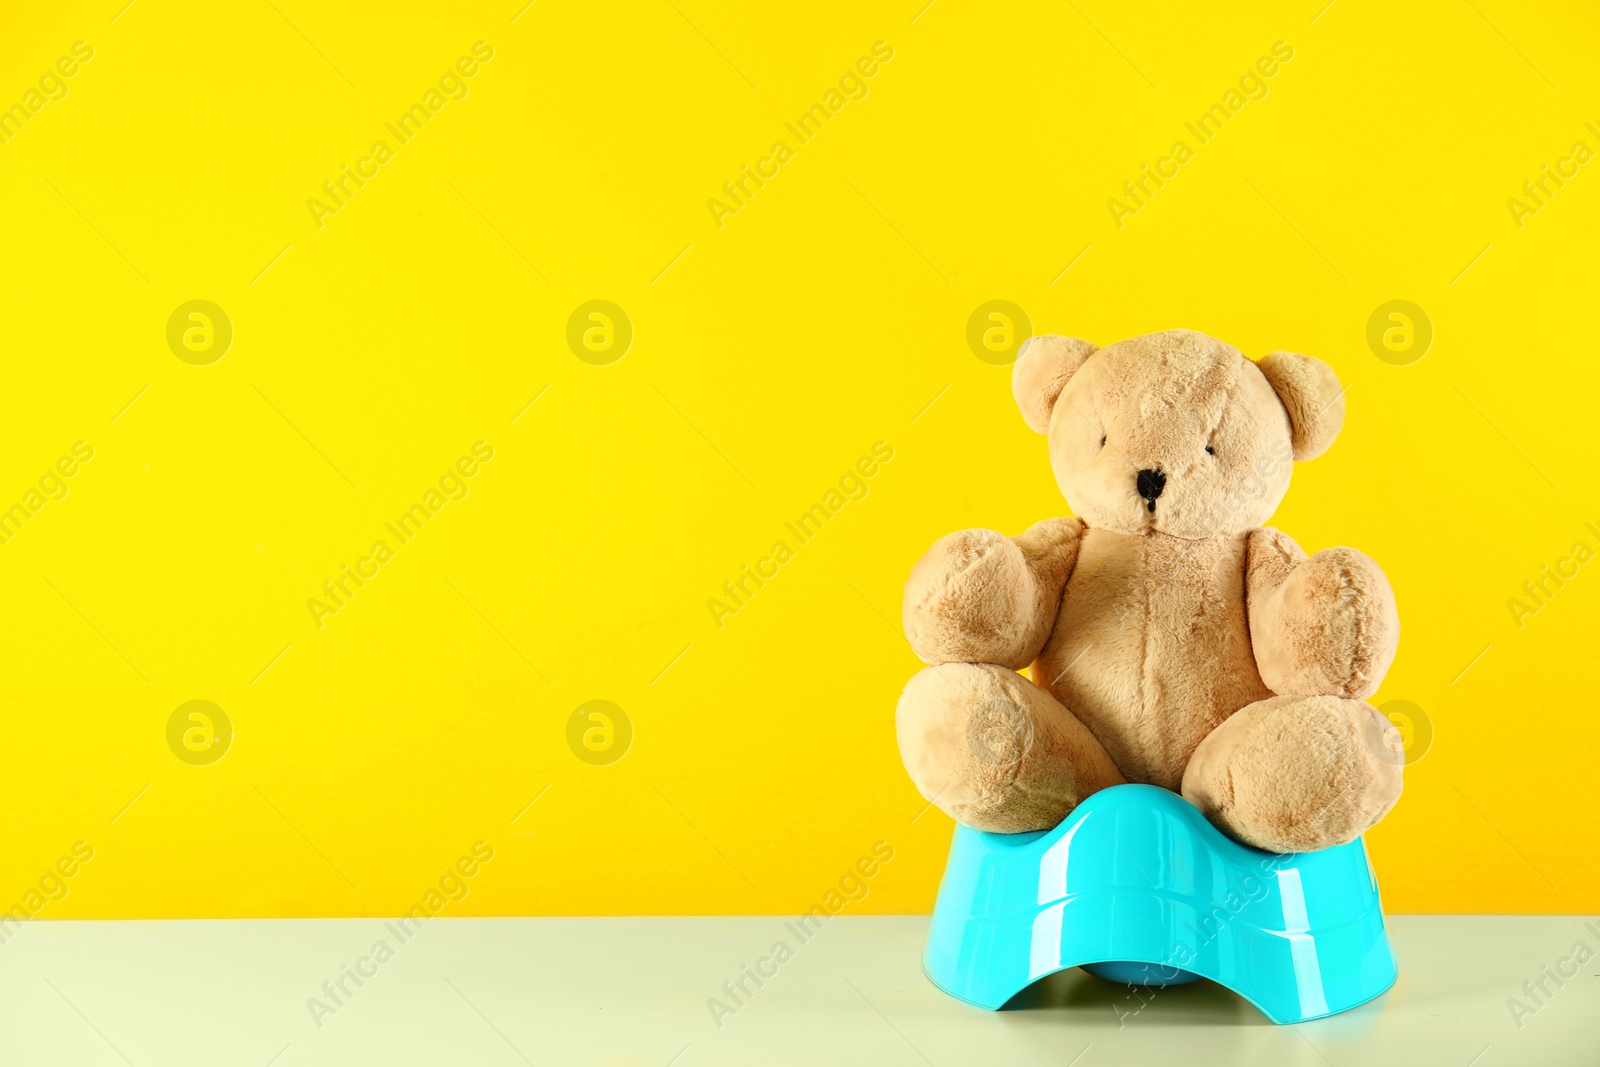 Photo of Teddy bear with blue potty on table against yellow background, space for text. Toilet training